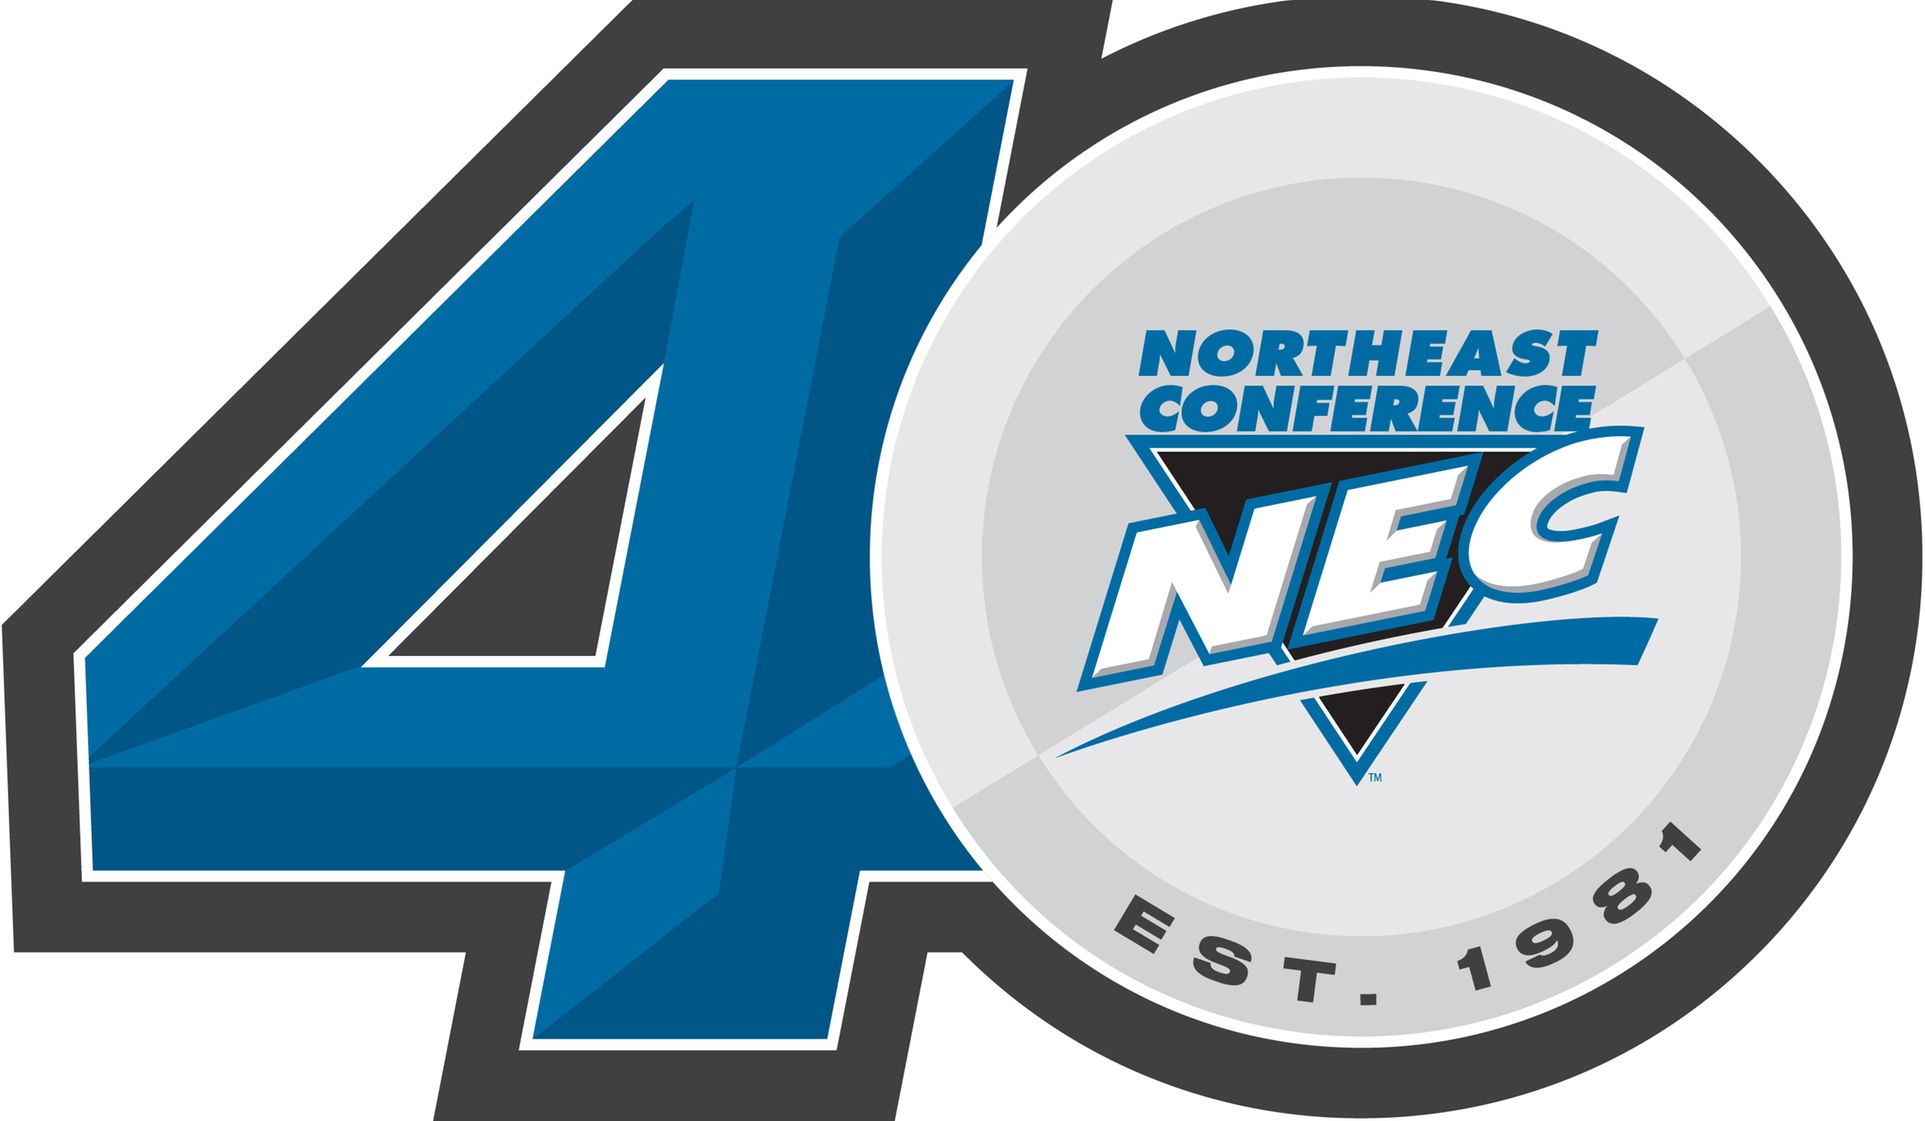 Two Blue Devils Named to NEC Women's Soccer Mount Rushmore